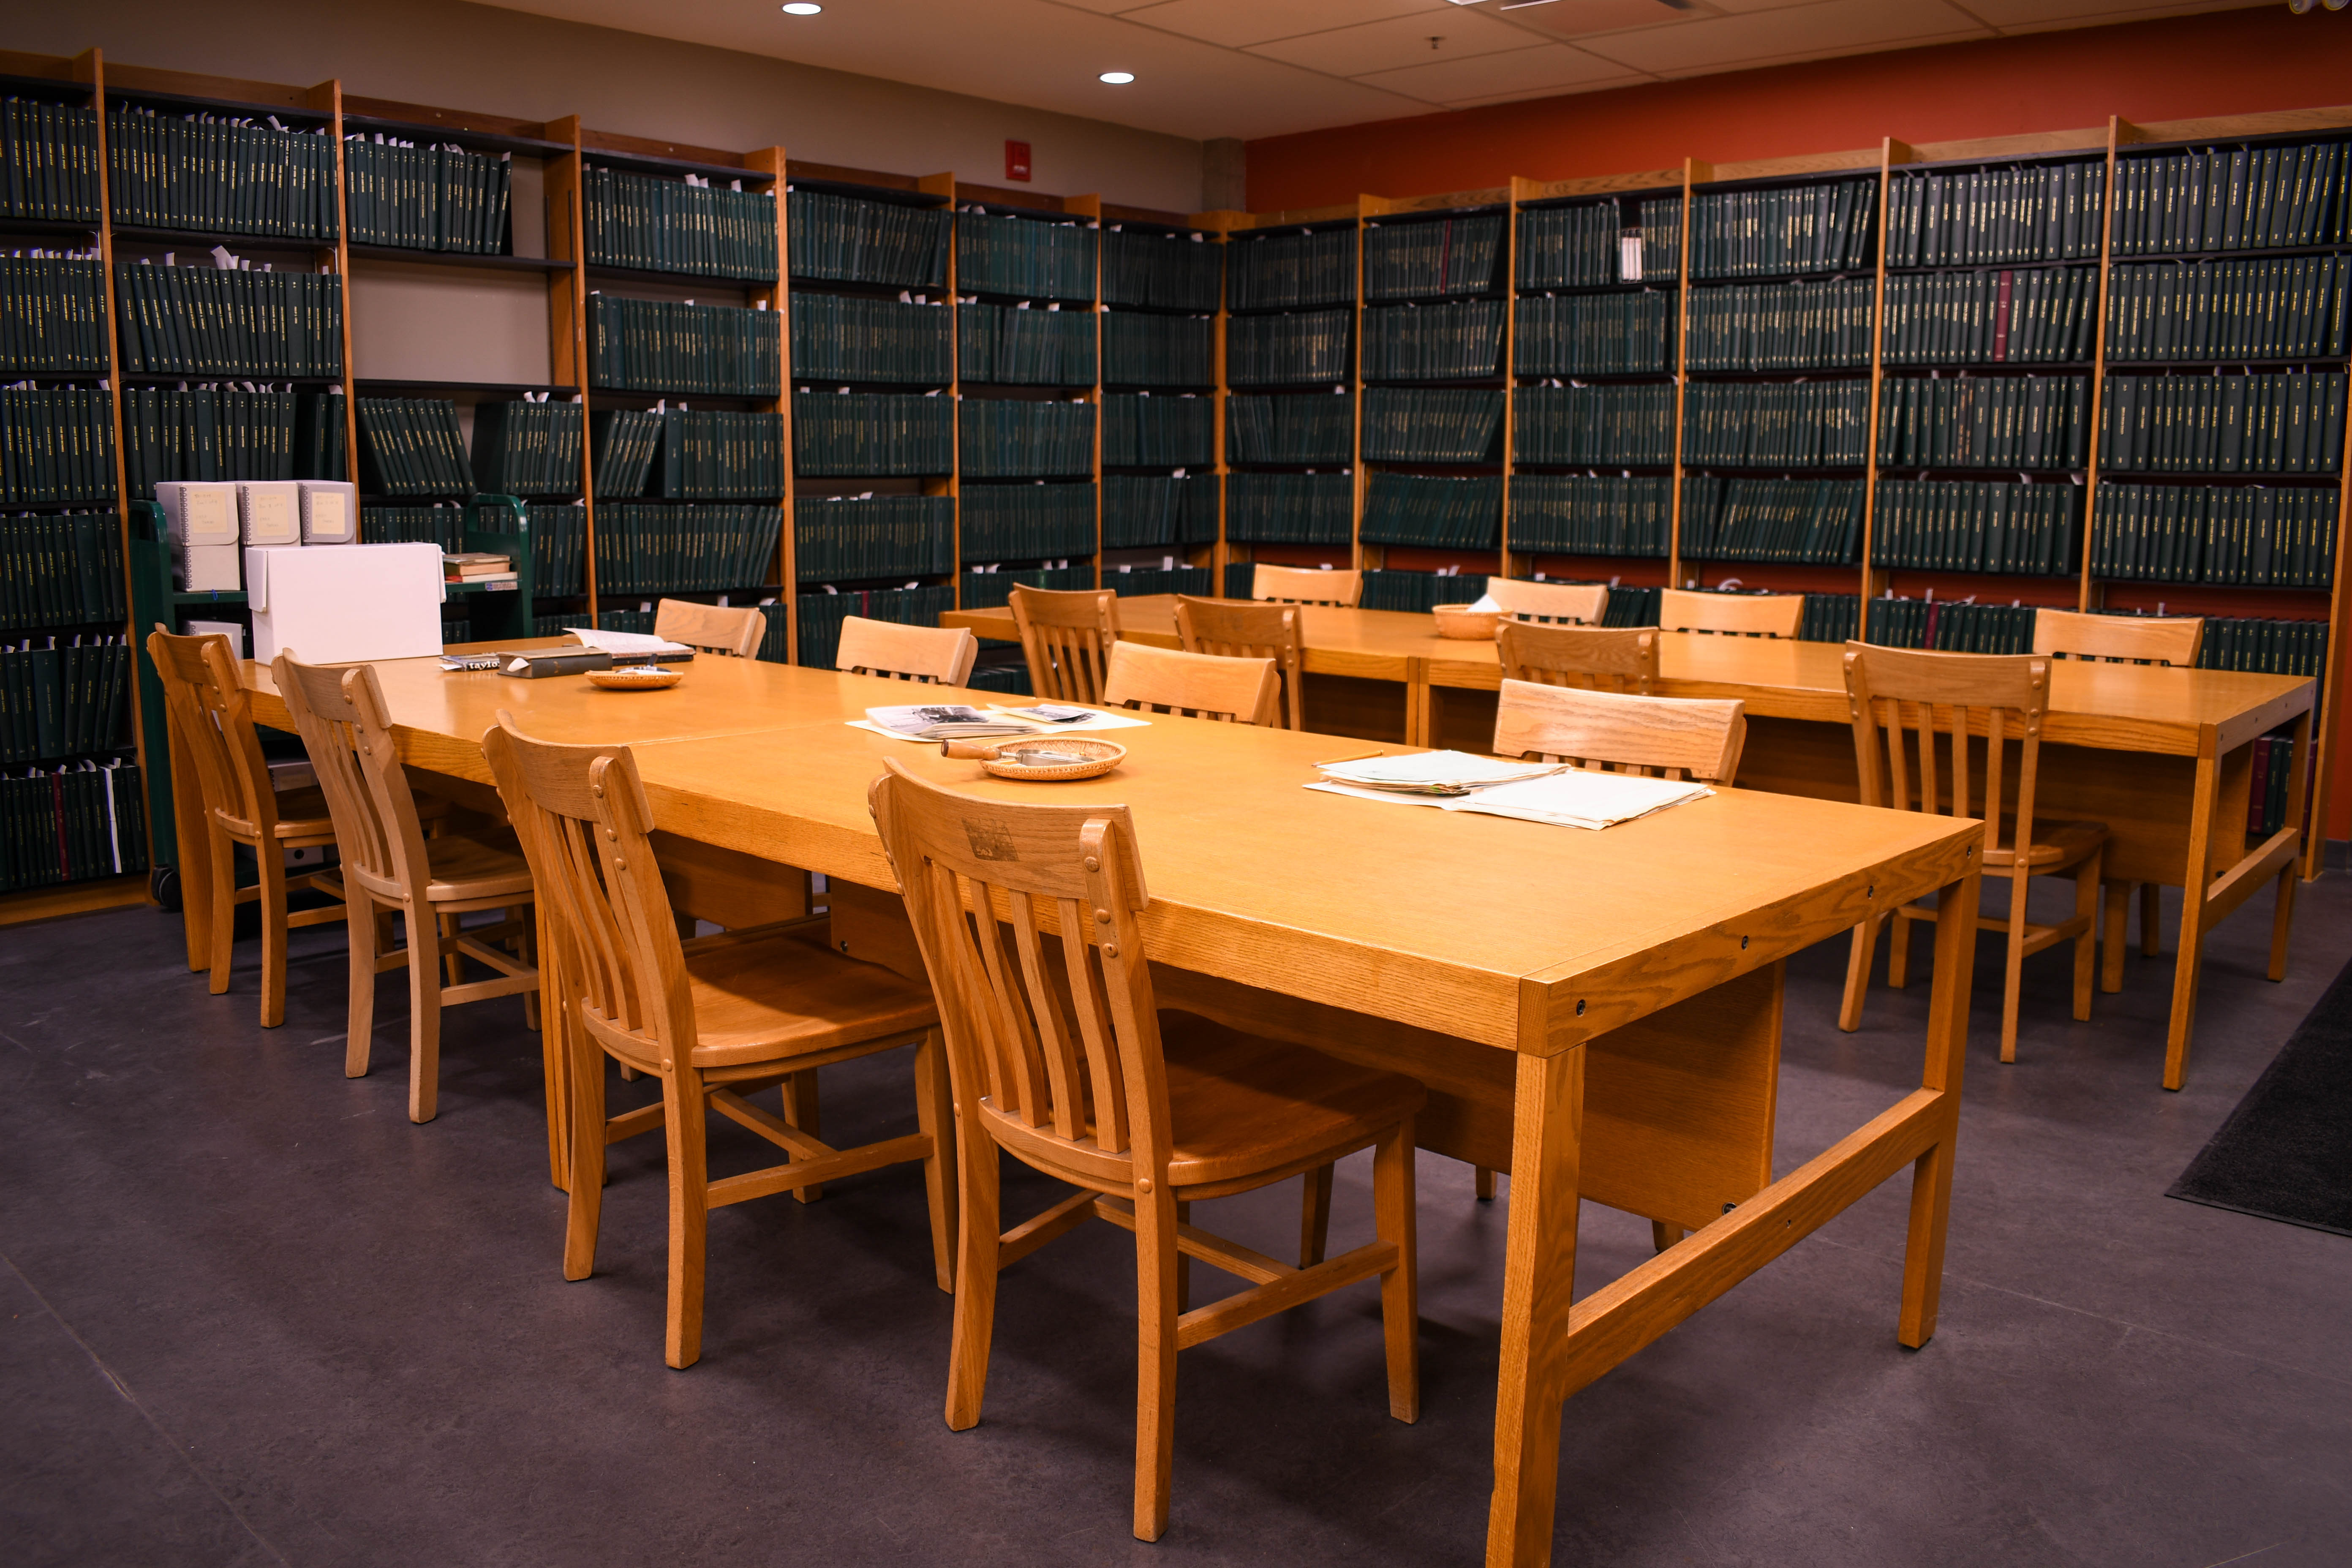 Tables and chairs in an archival reading room. There are boxes and other archival material on the tables and green books lining the walls.